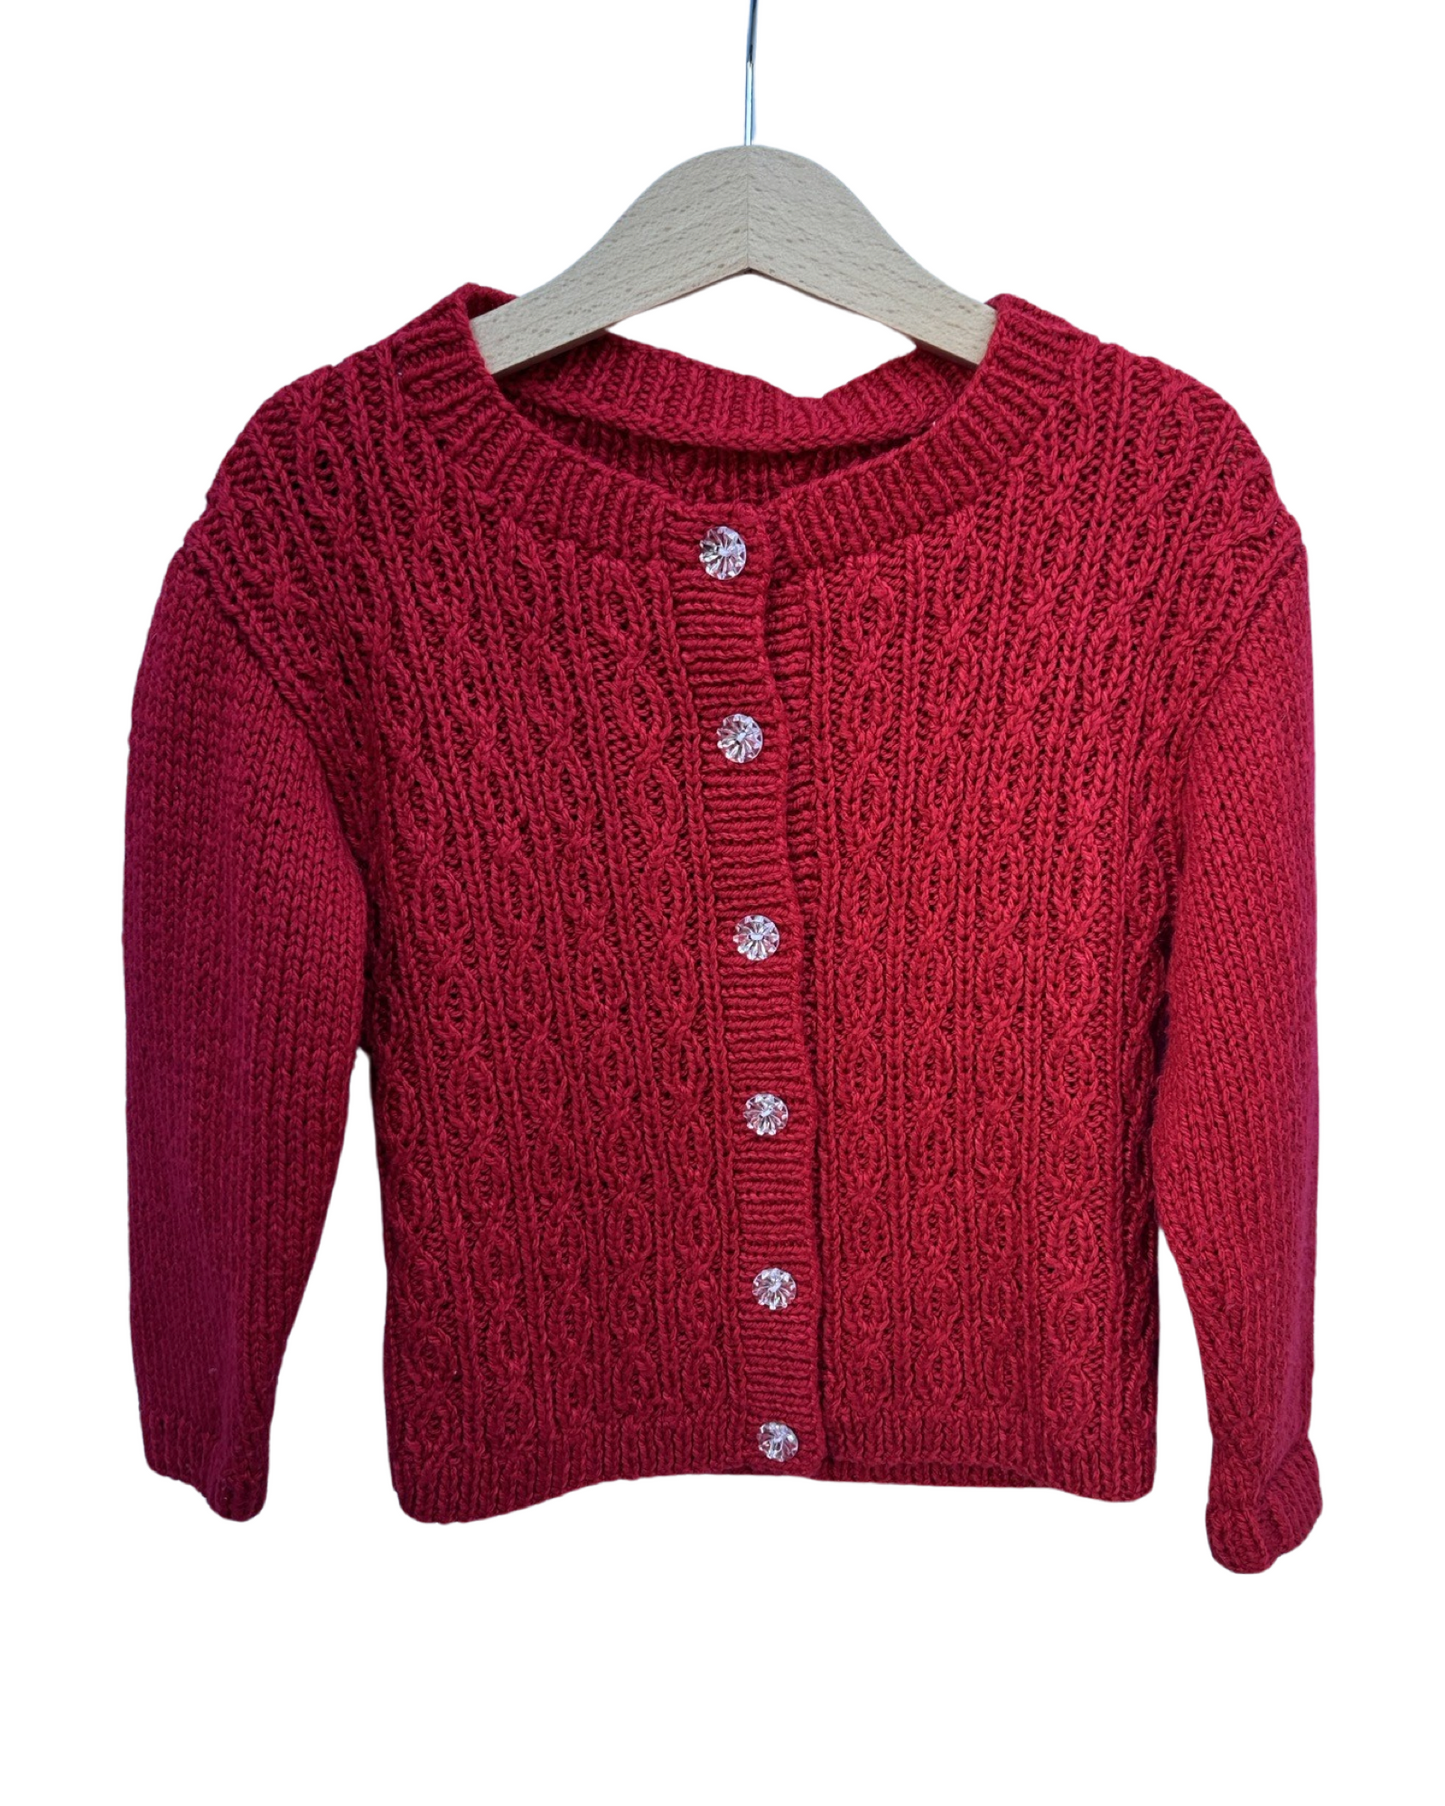 Handknitted red cardigan (size 3-4yrs)